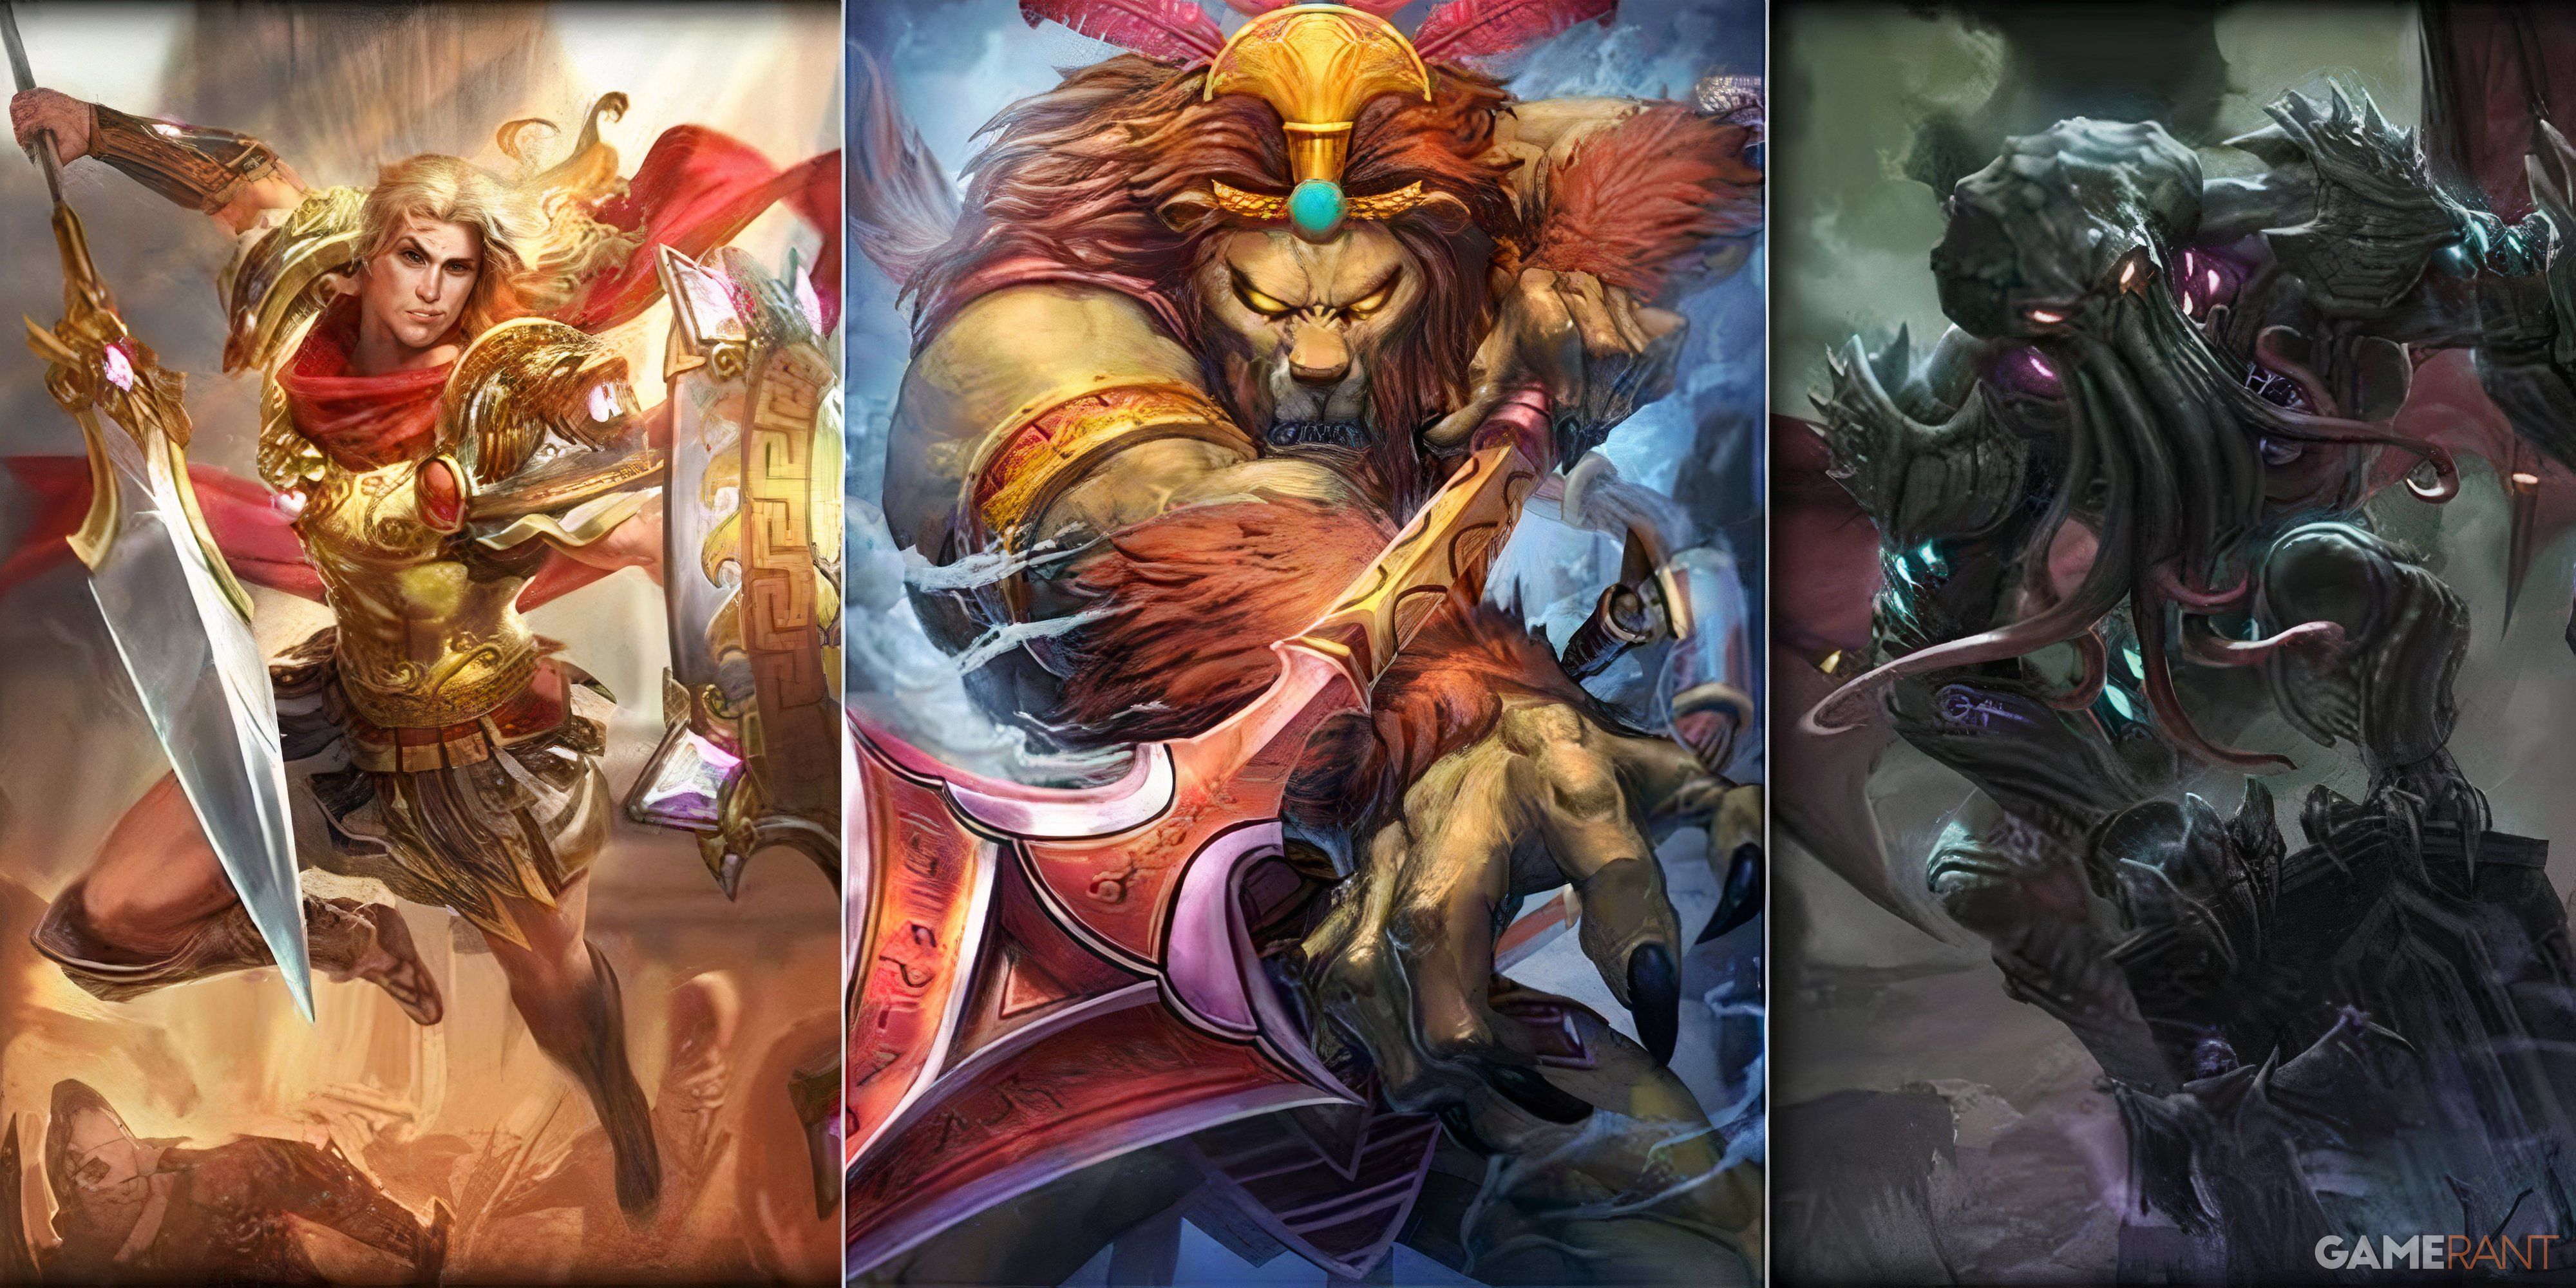 art for achilles, Anhur, and Cthullu from Smite 